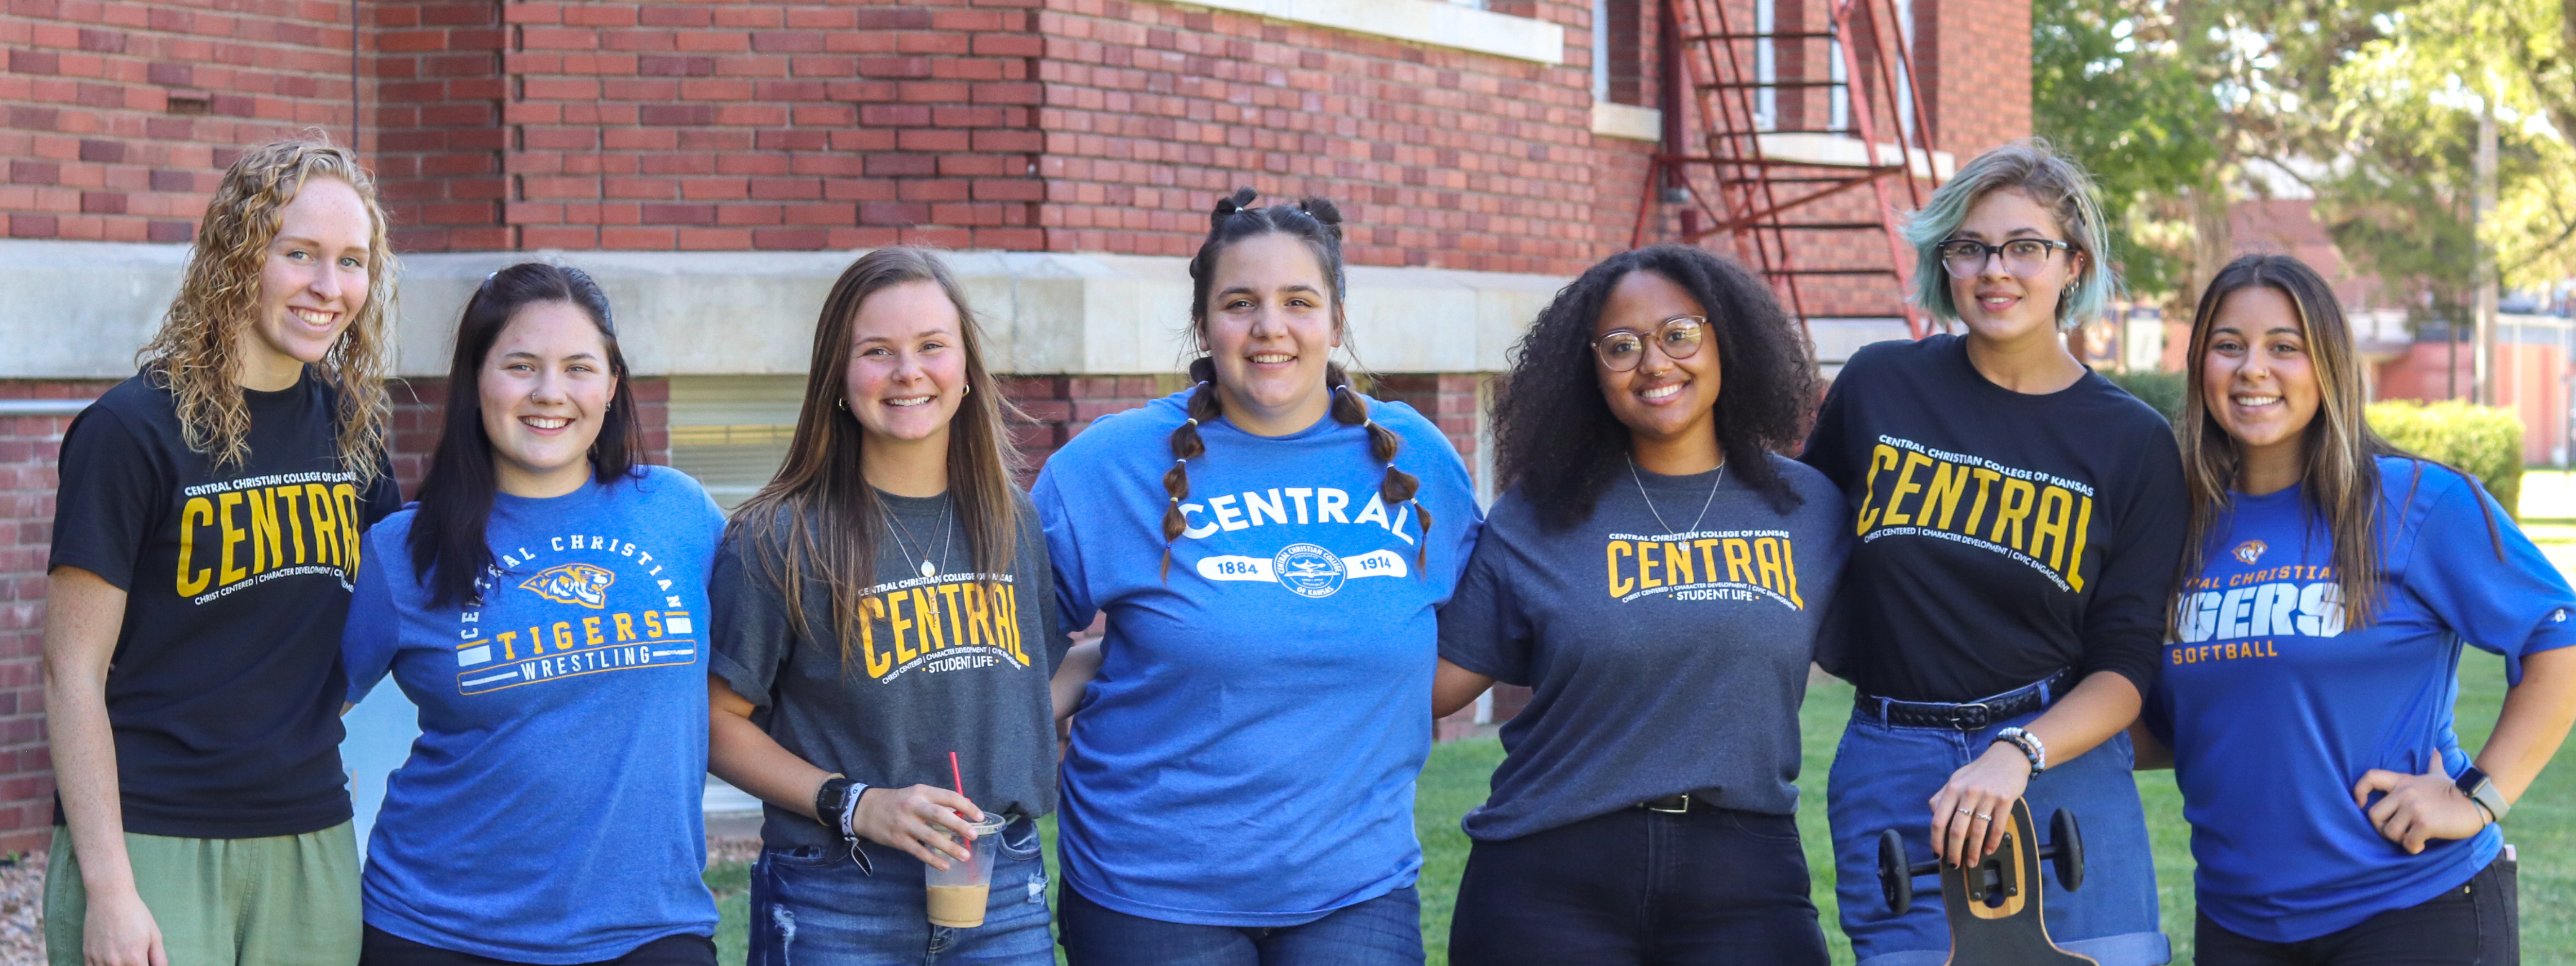 Education Central Photo Header: girls standing in a line wearing Central gear and smiling